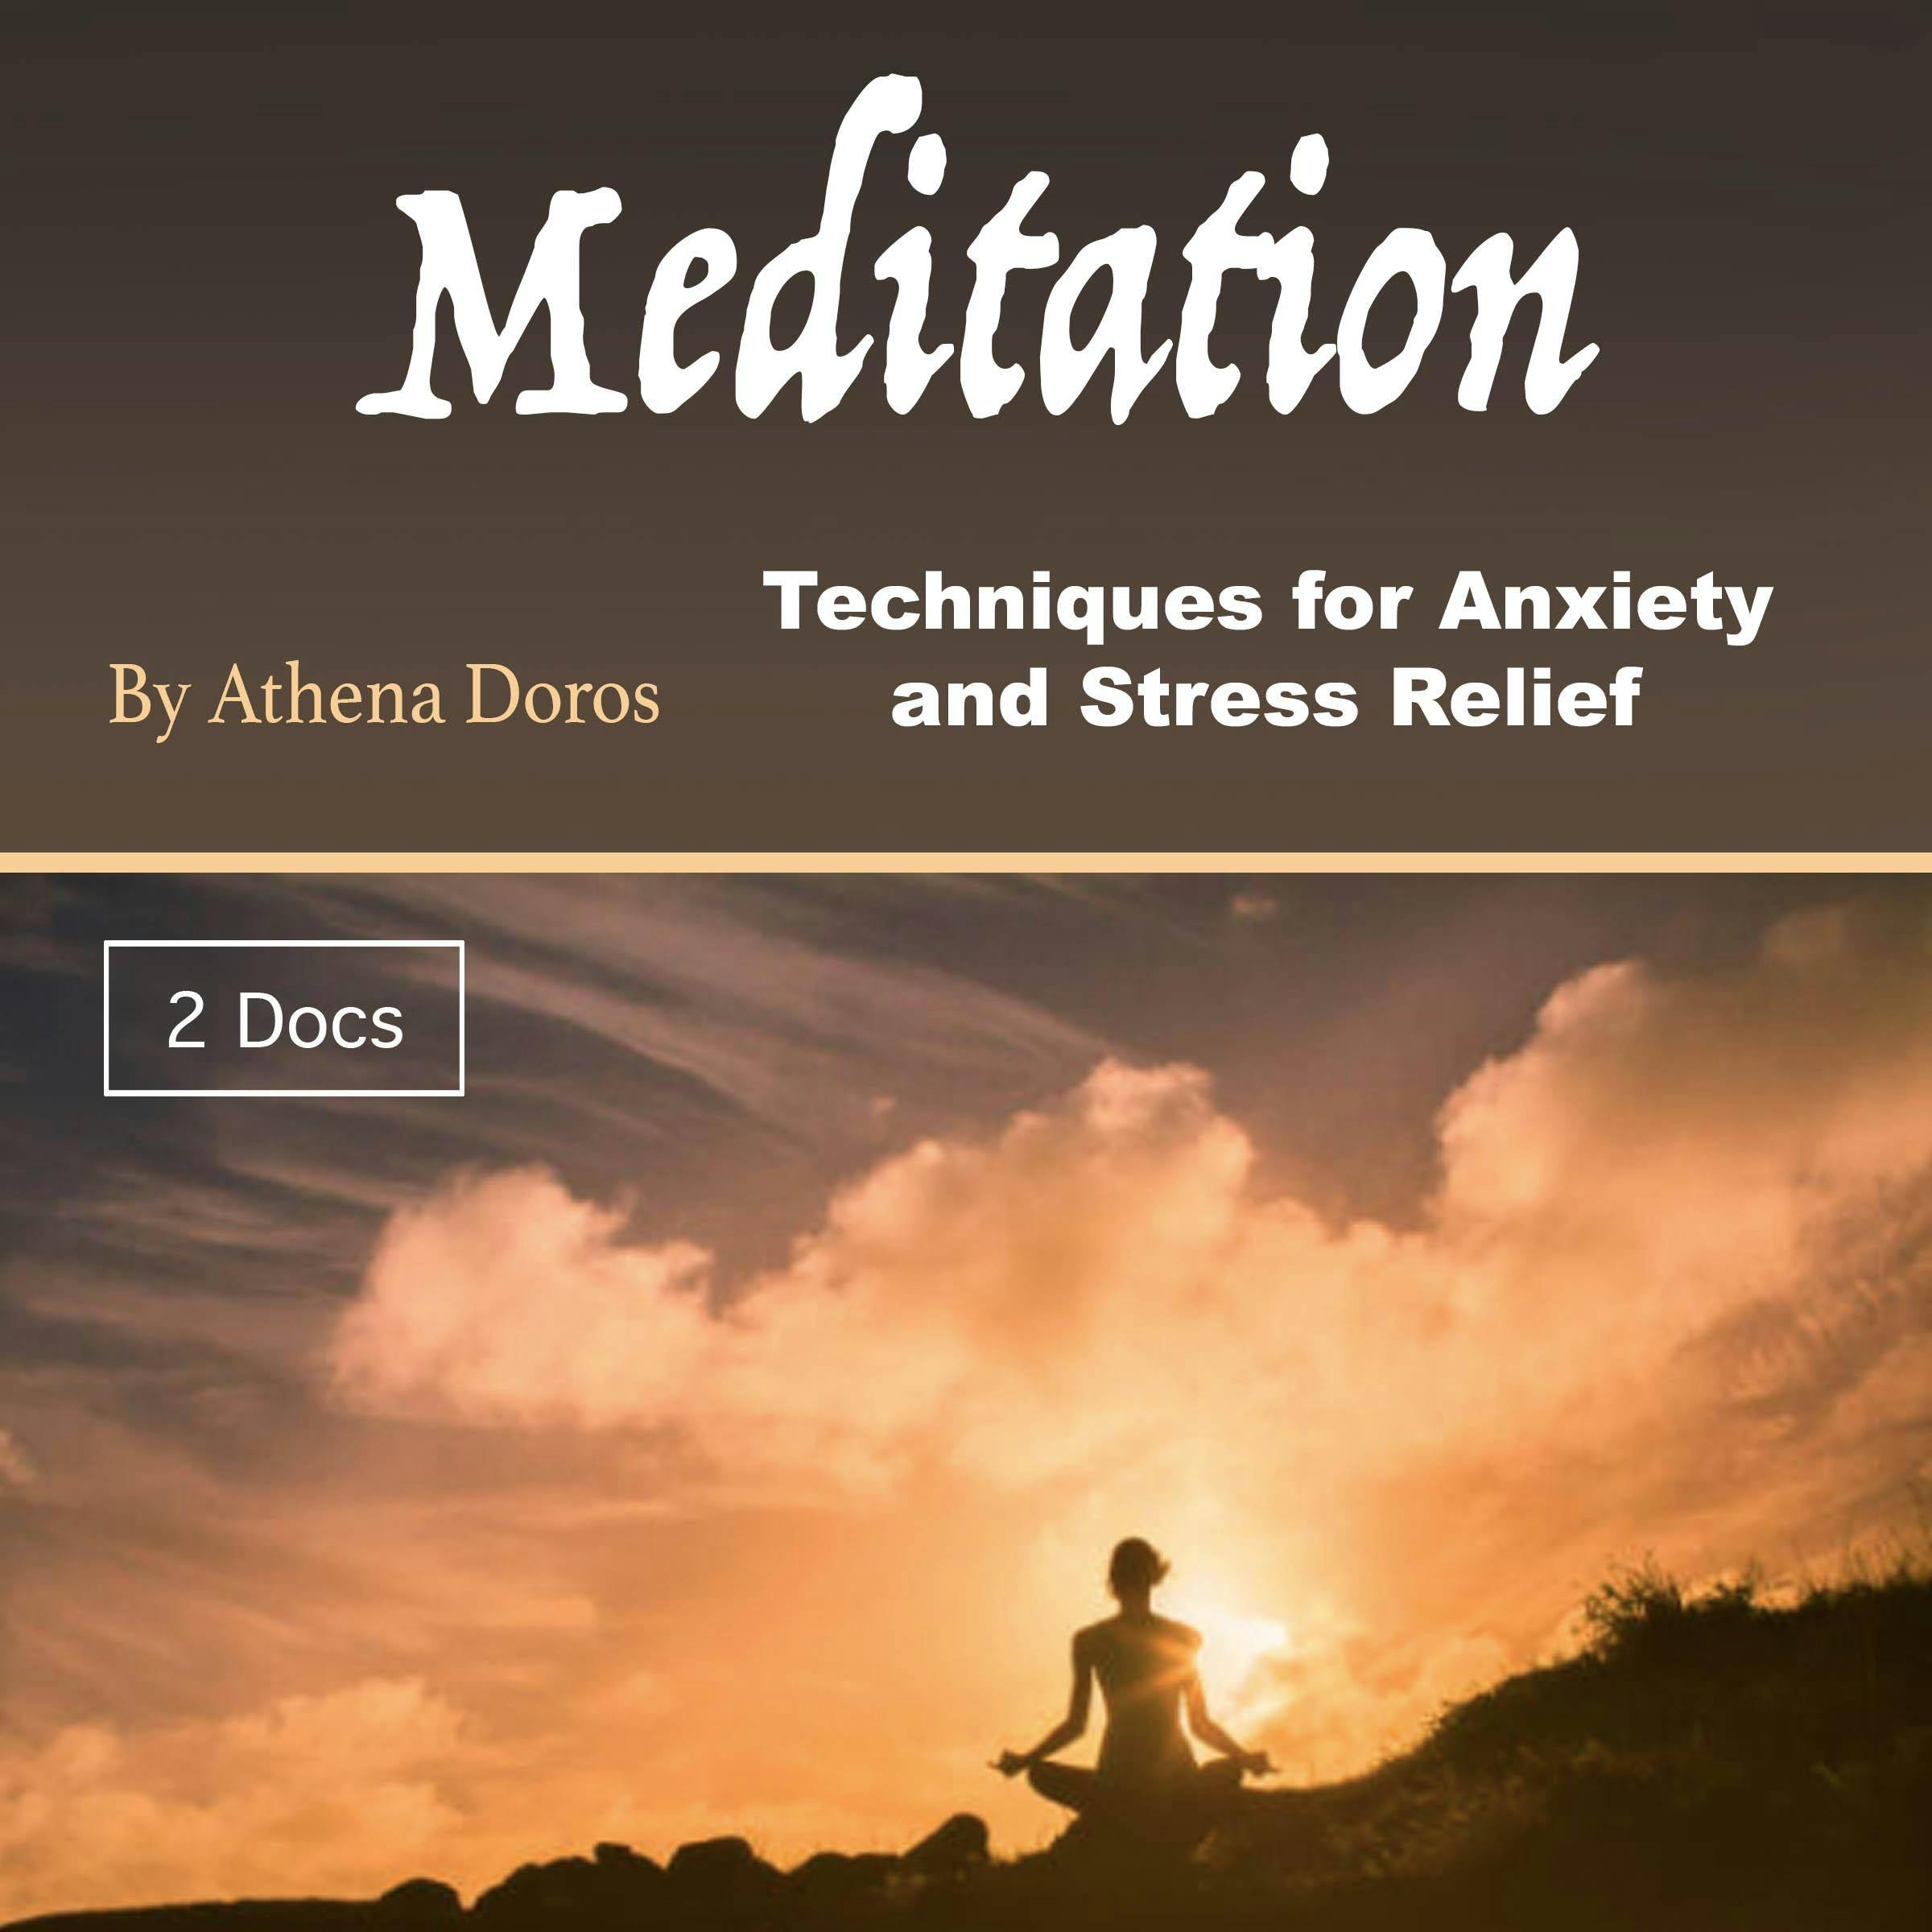 Meditation: Techniques for Anxiety and Stress Relief - Athena Doros